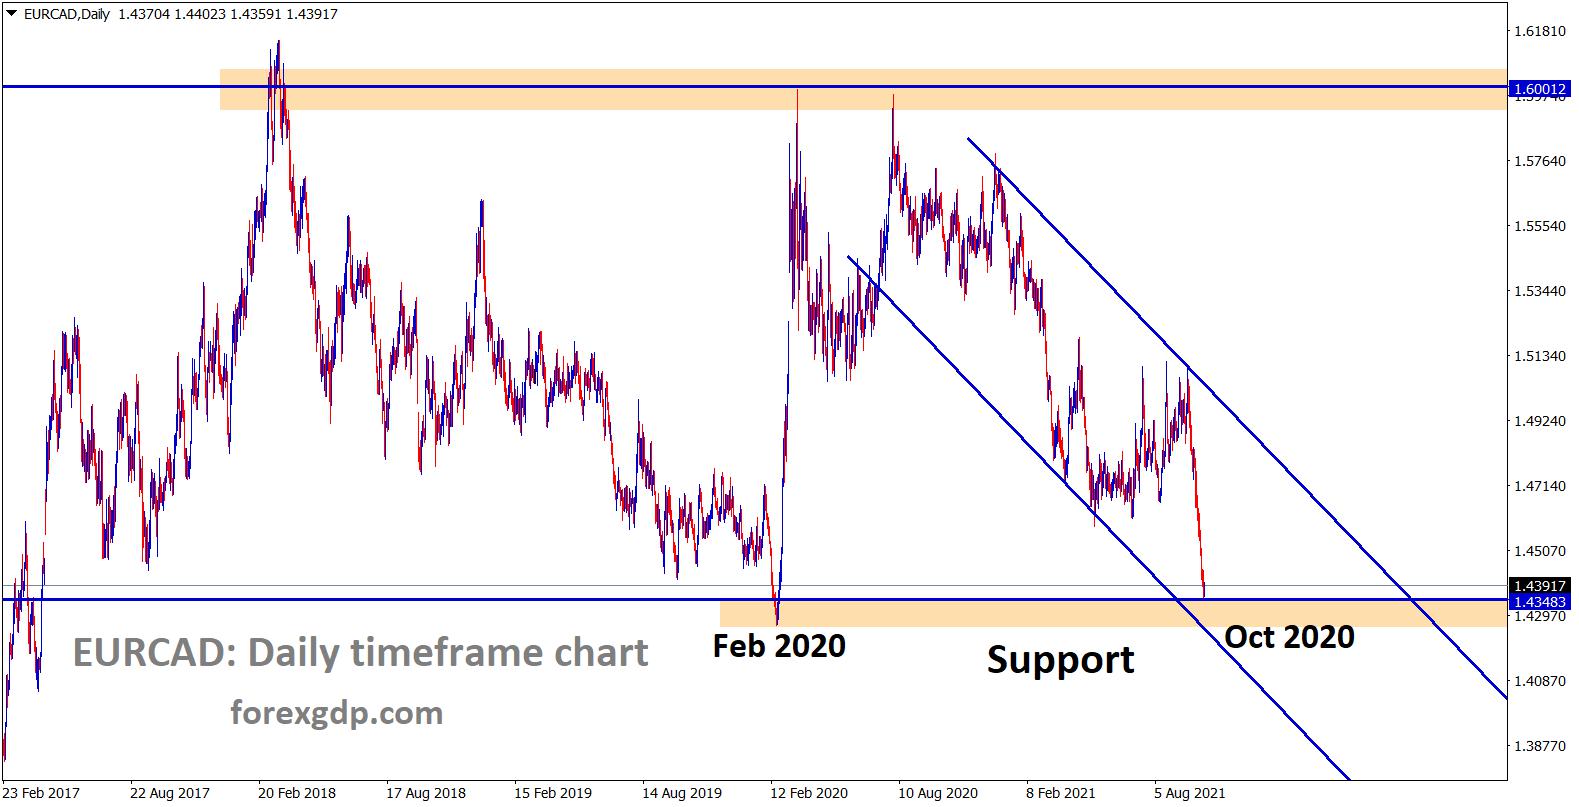 EURCAD is near to the major support